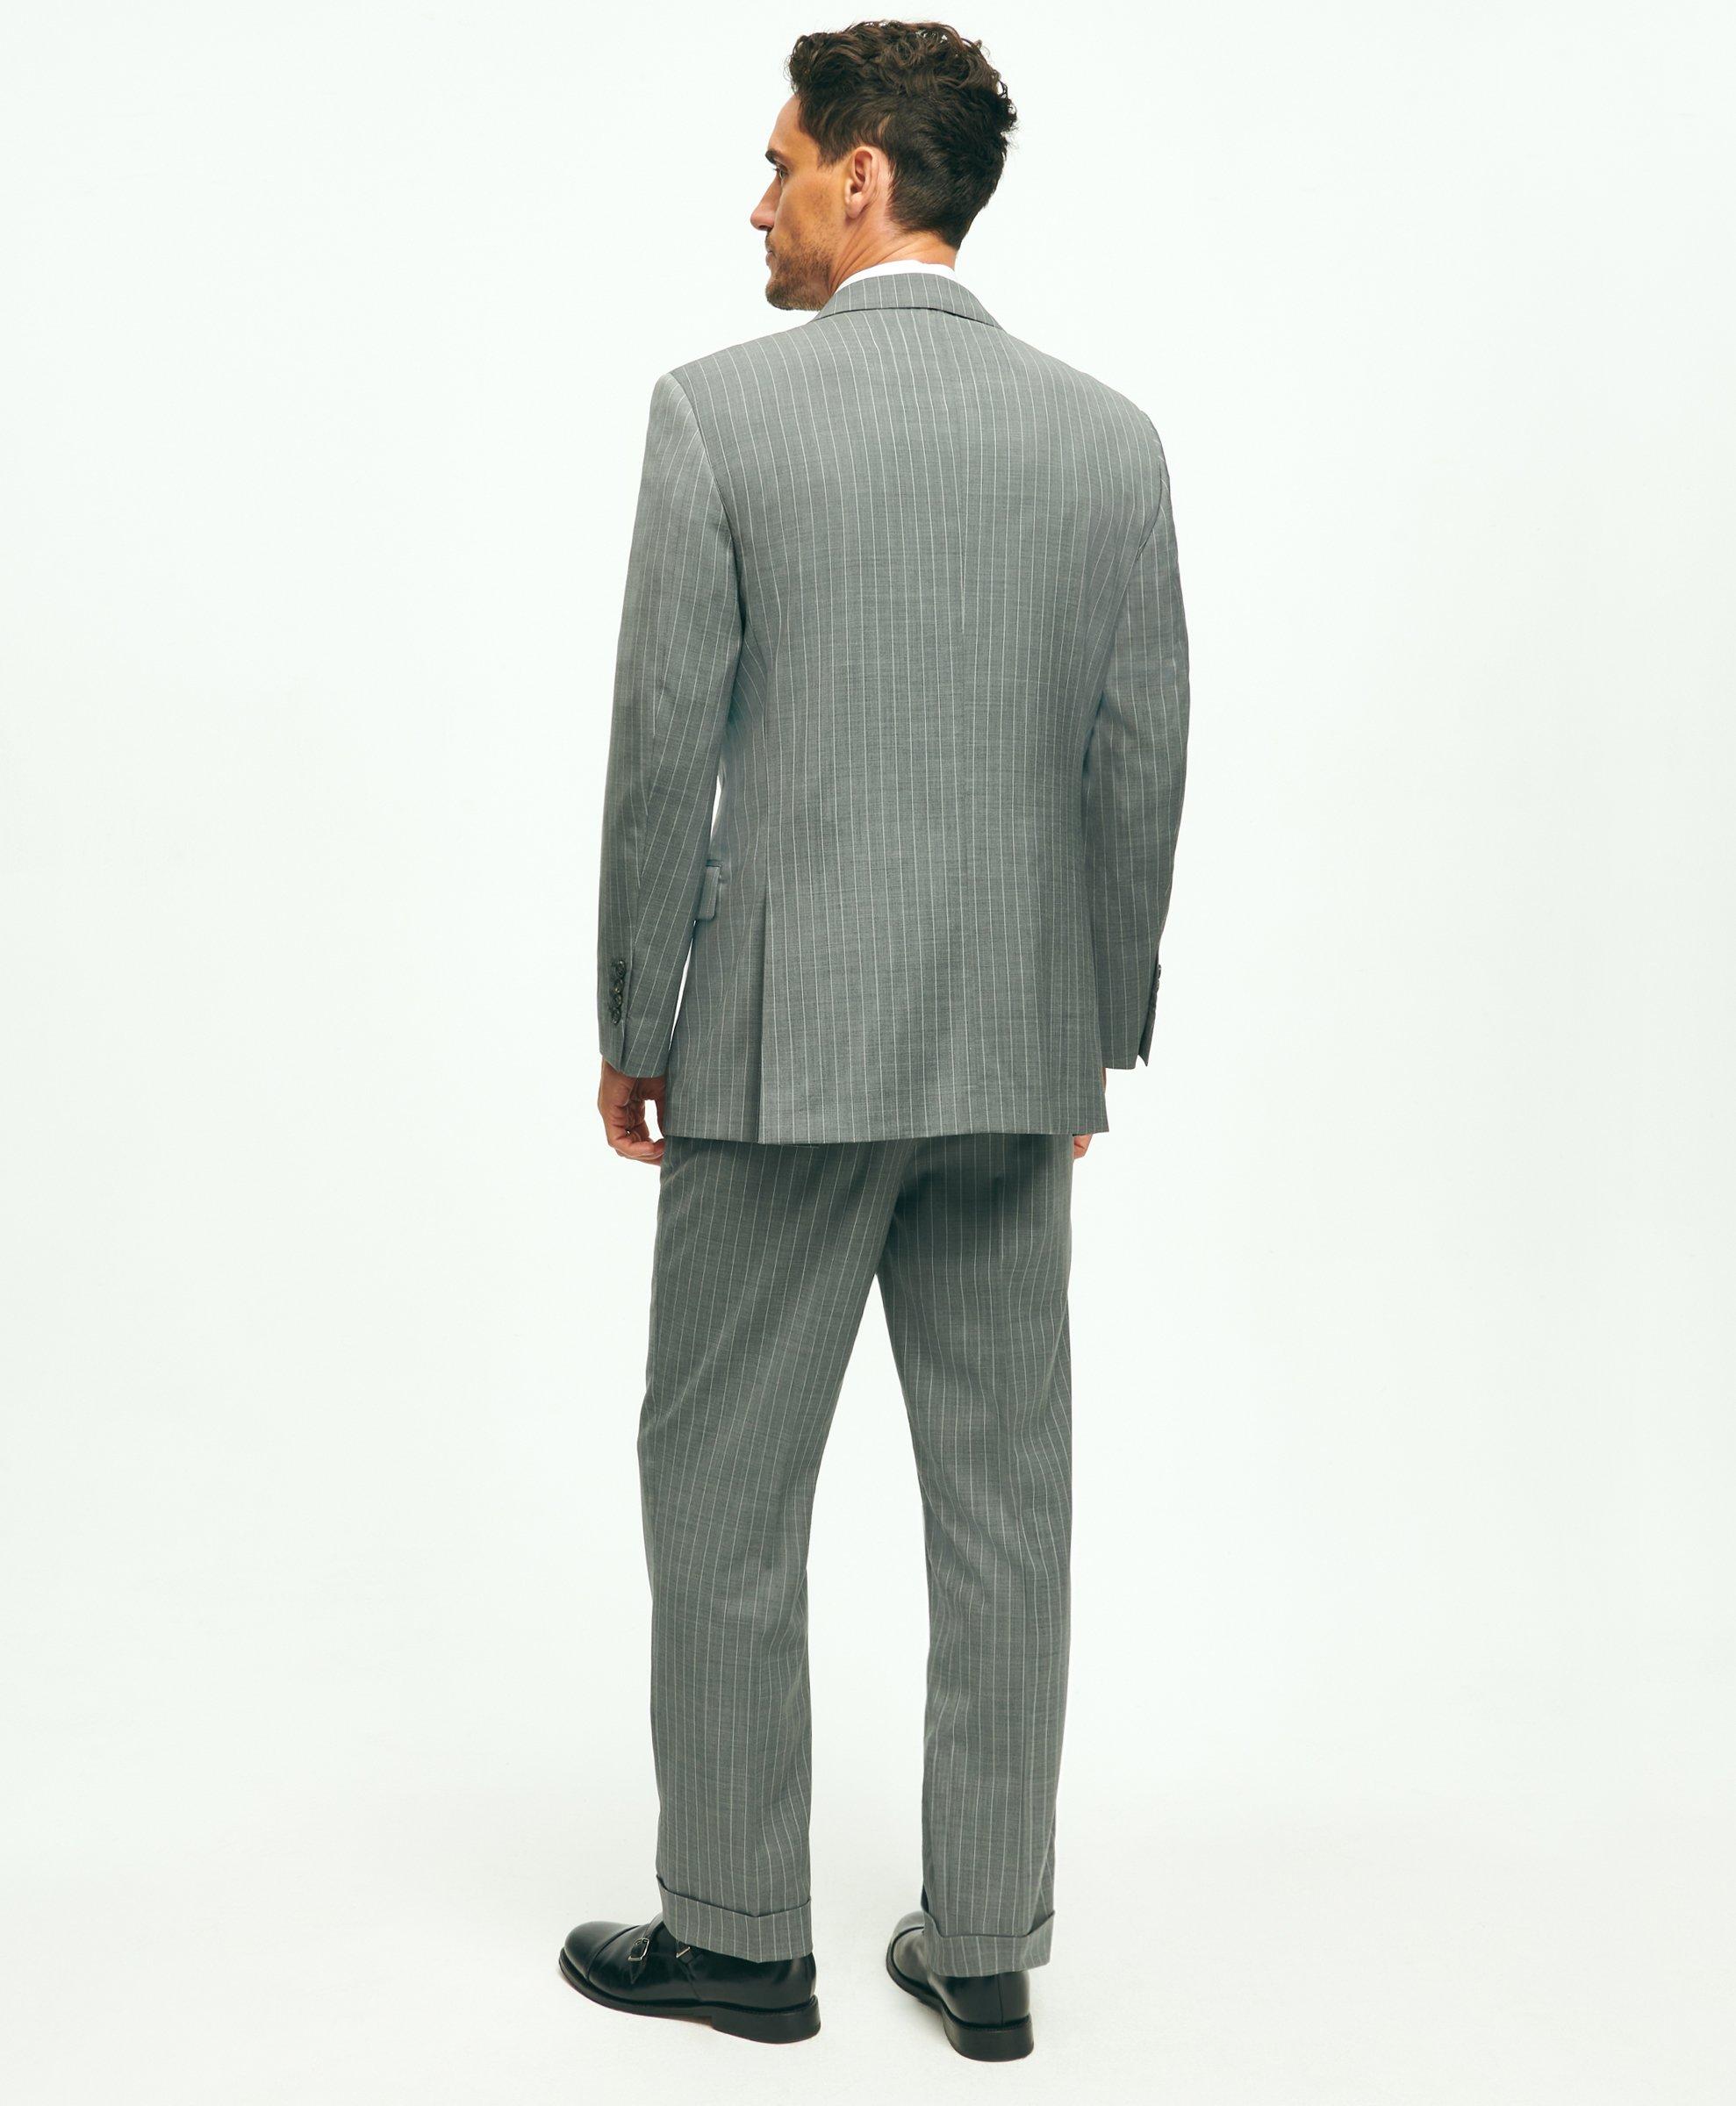 The We Mean Business | Light Grey Madison Suit Pants